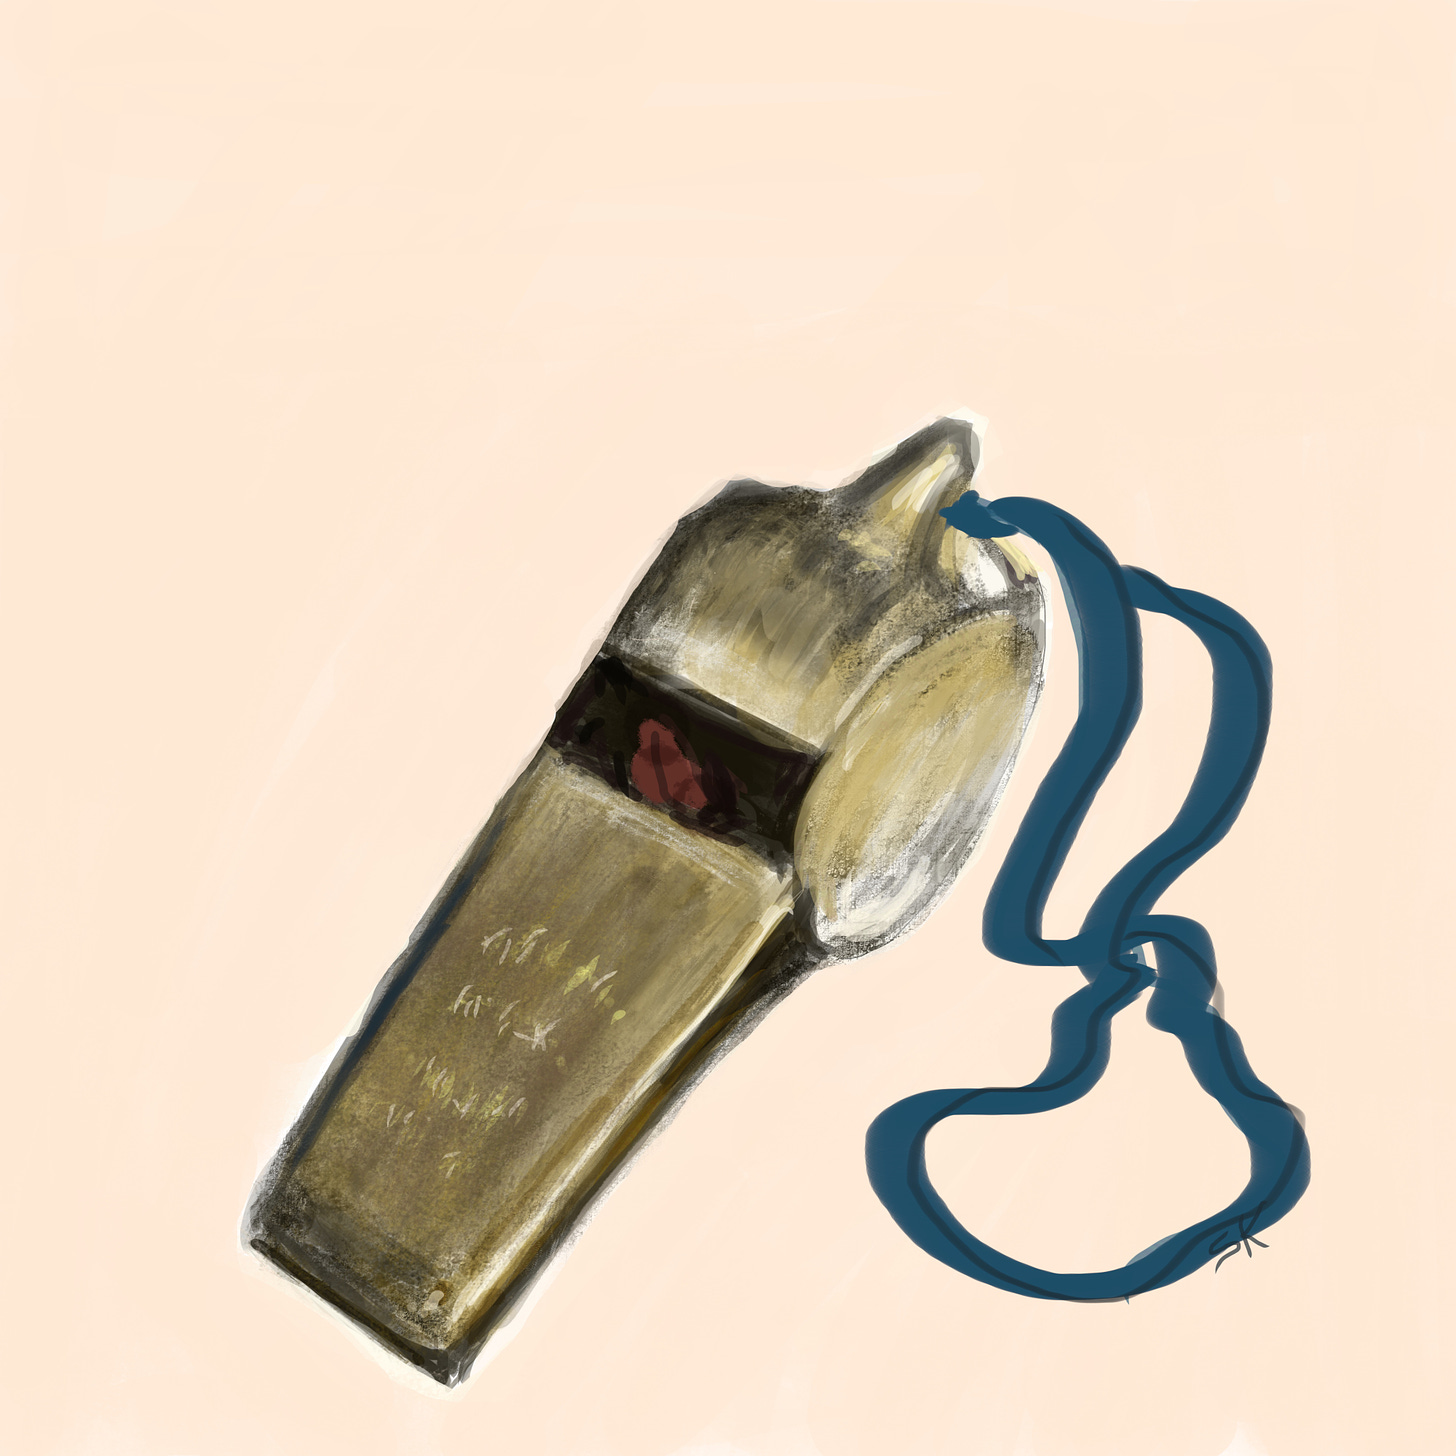 Sherry Killam's metal whistle on a blue string.